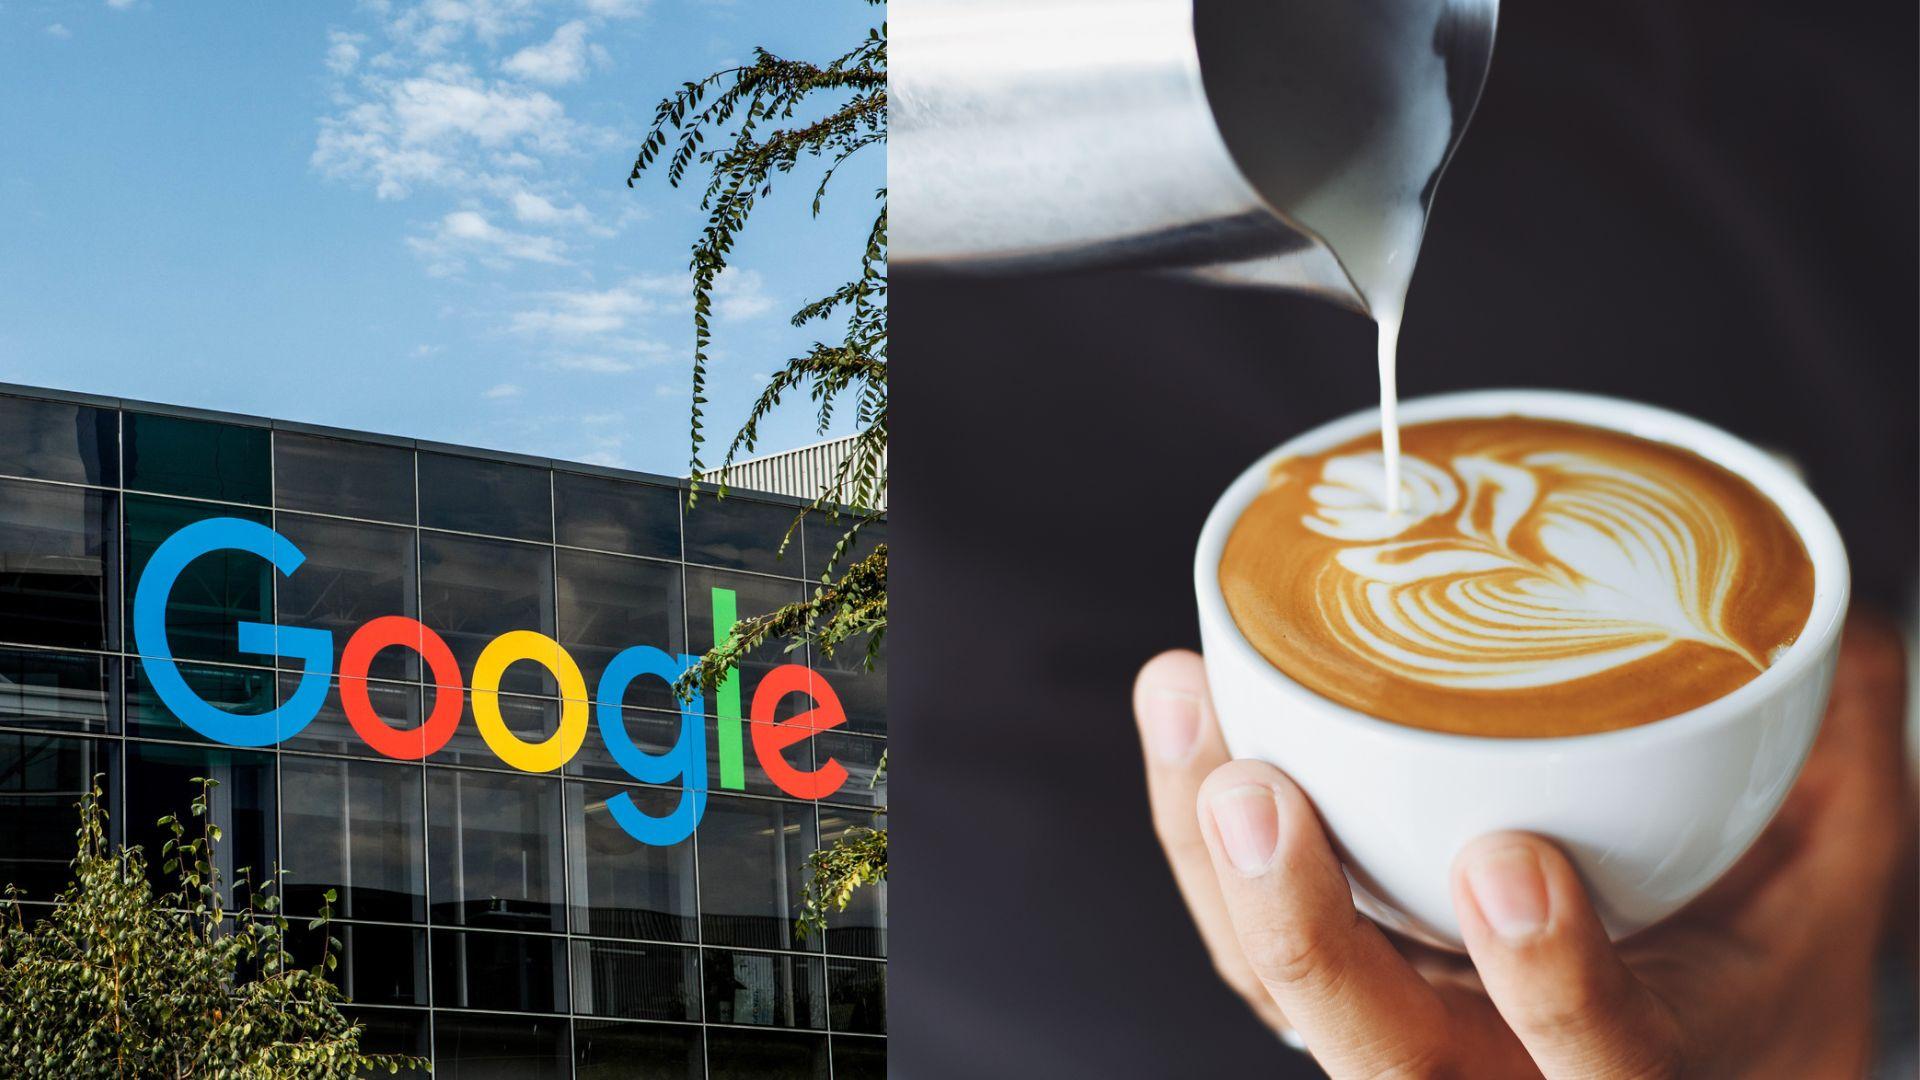 Google headquarters and a coffee being poured